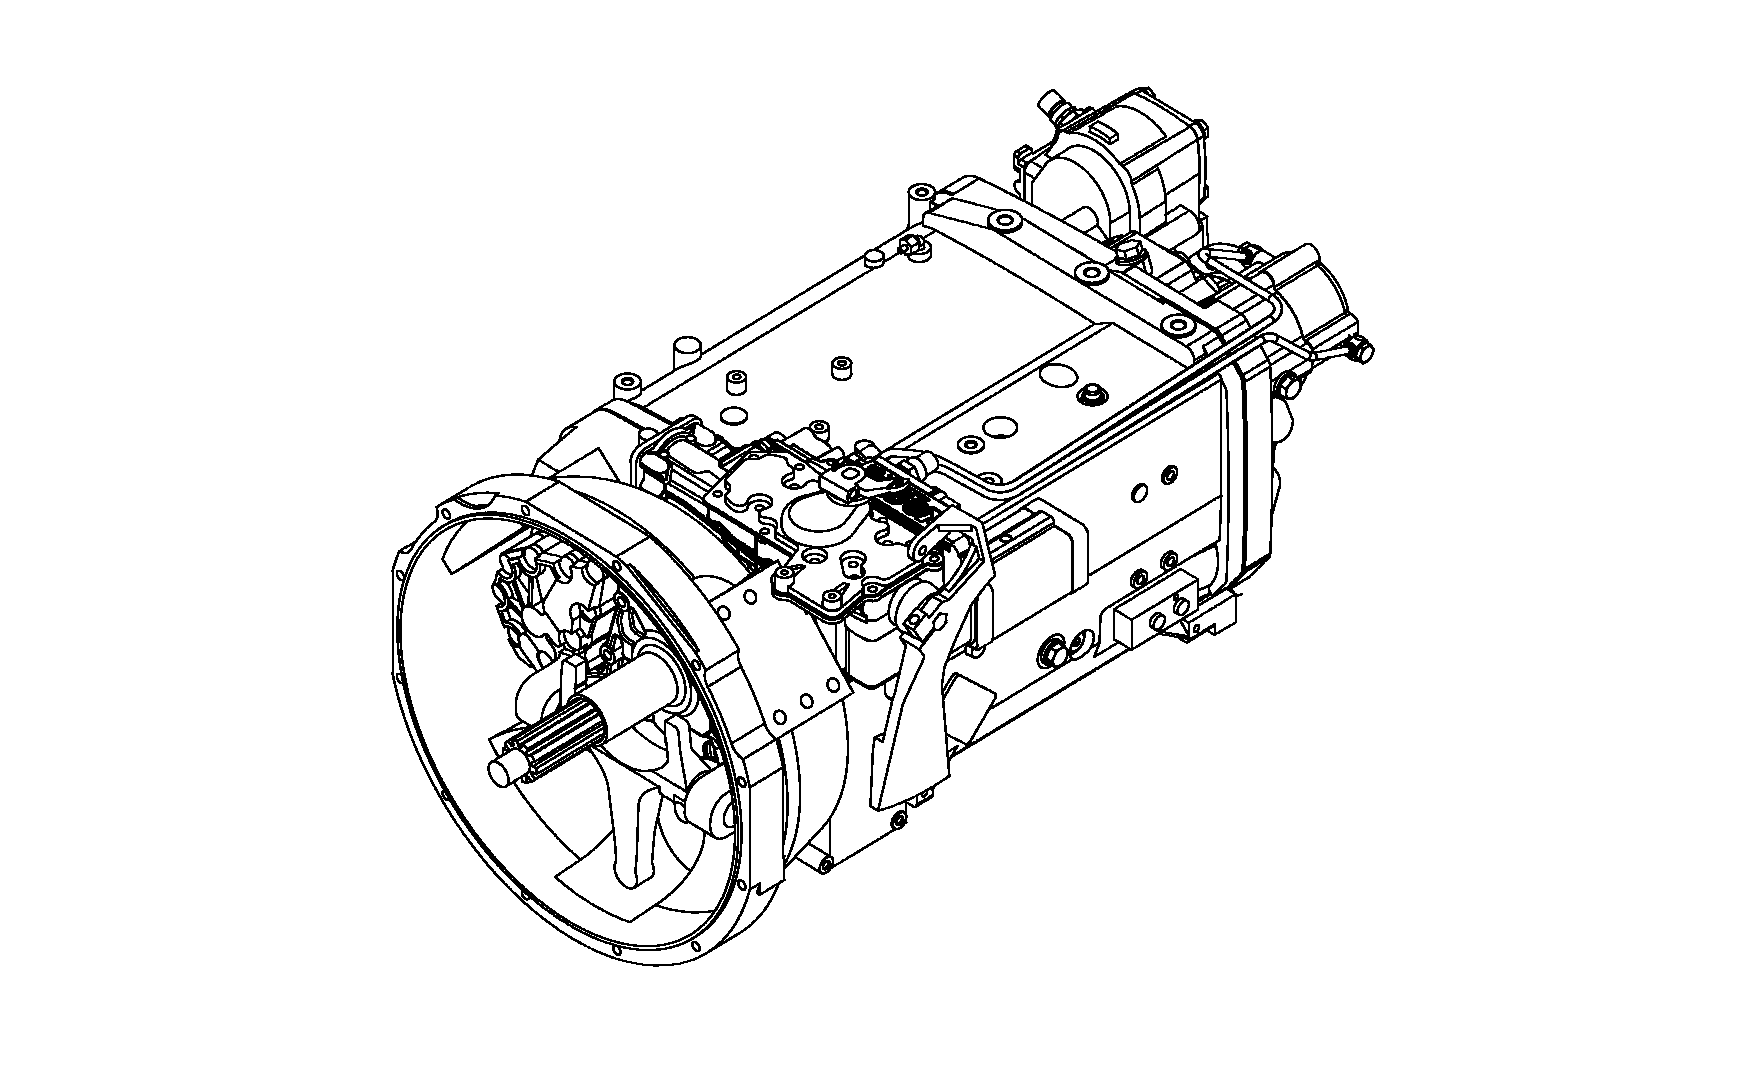 drawing for DAEWOO 3321010800 - 16 S 151